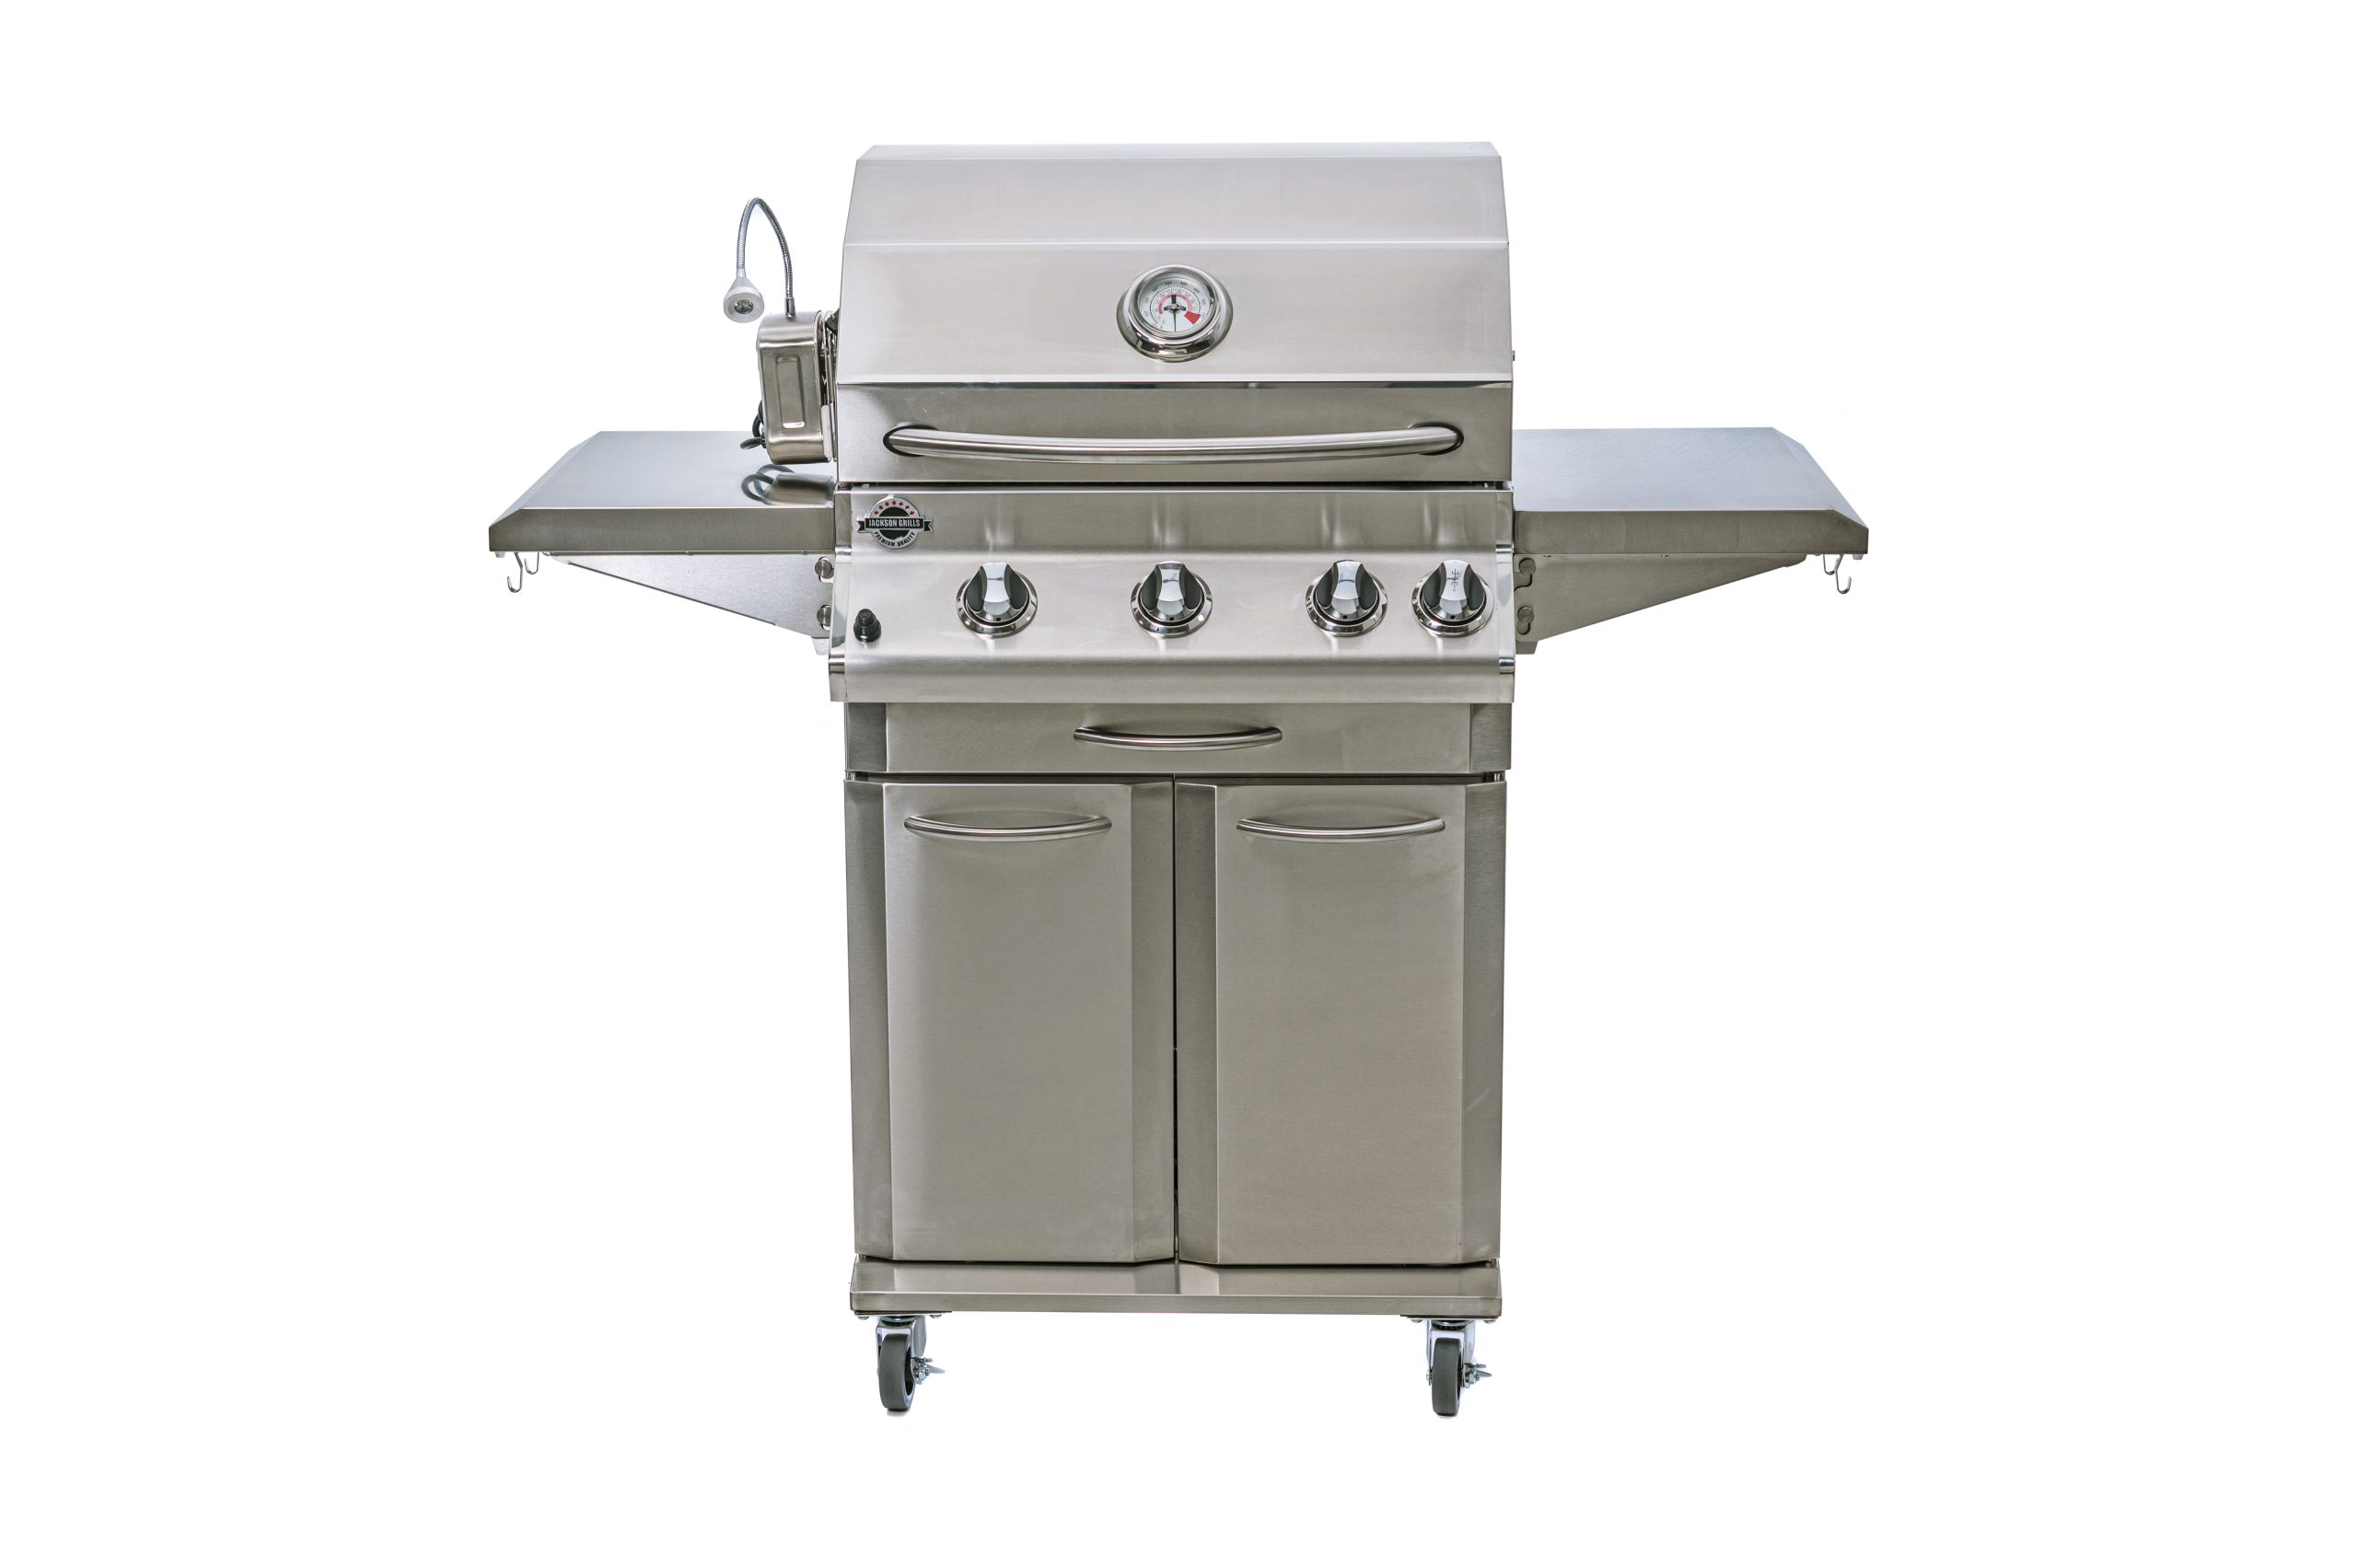 Lux 550 stainless steel grill